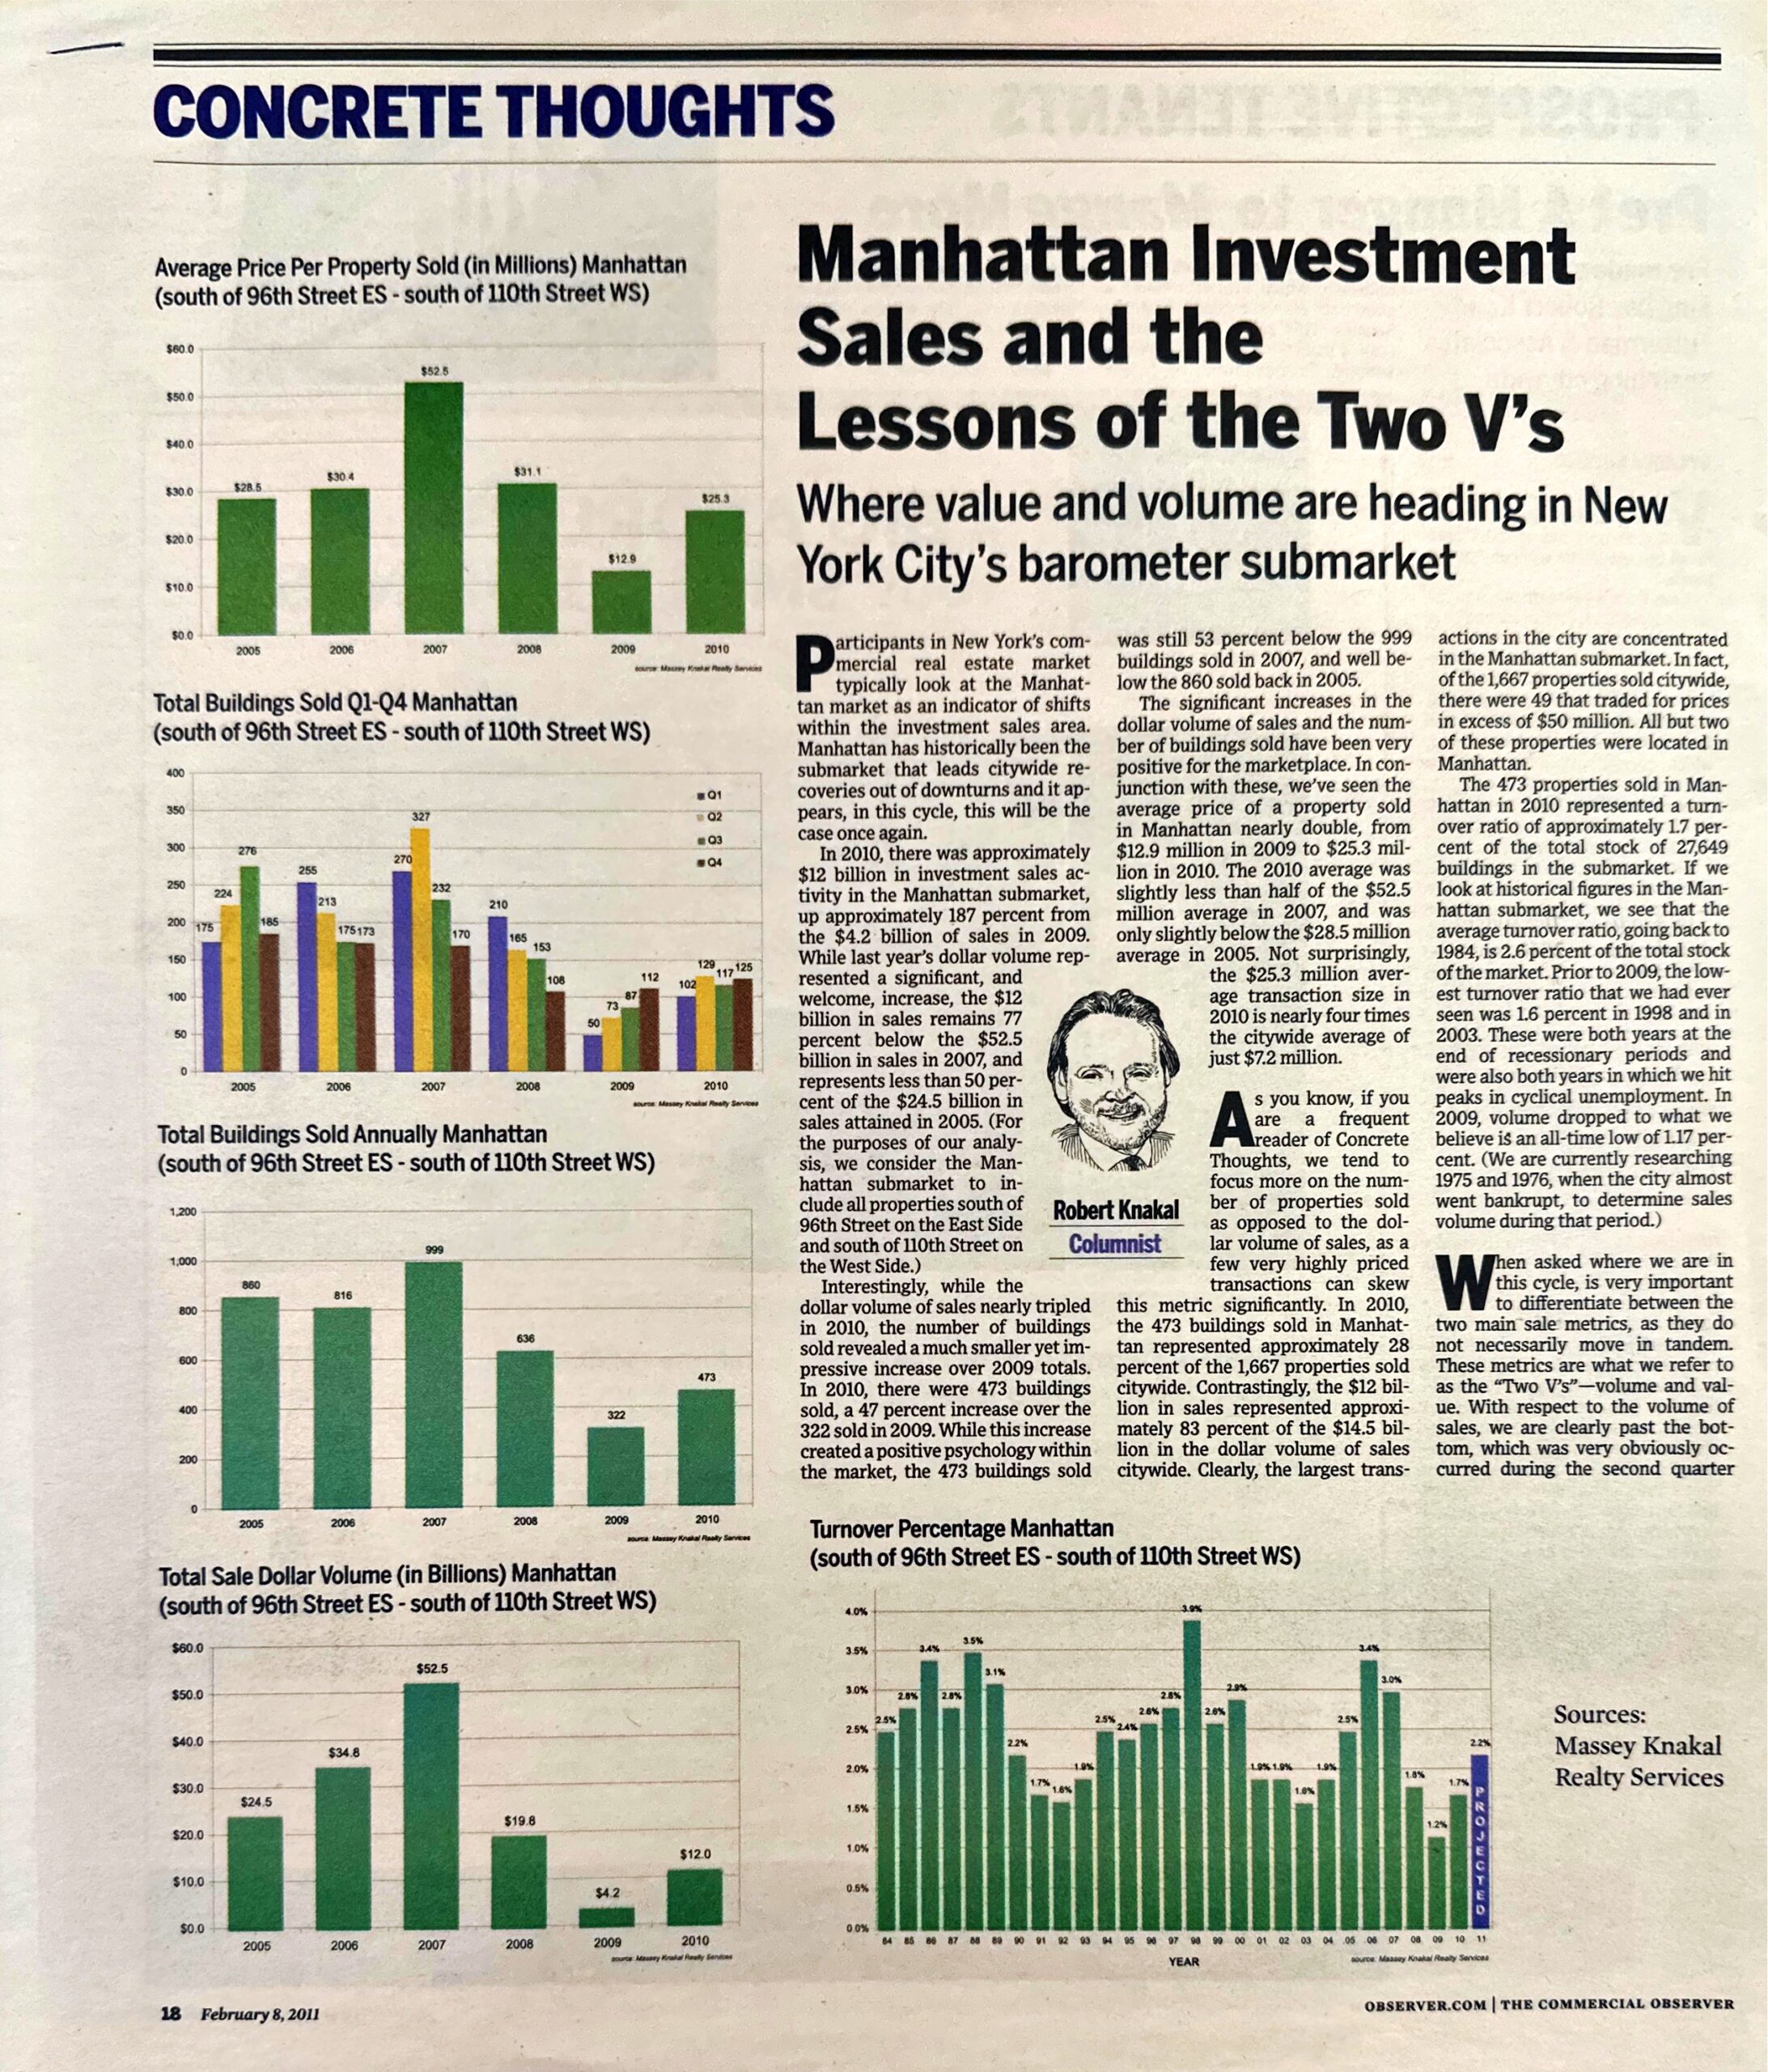 2-8 Concrete Thoughts - Manhattan Investment Sales and the Lessons of the Two V’s - Feb 8 2011_Page_1